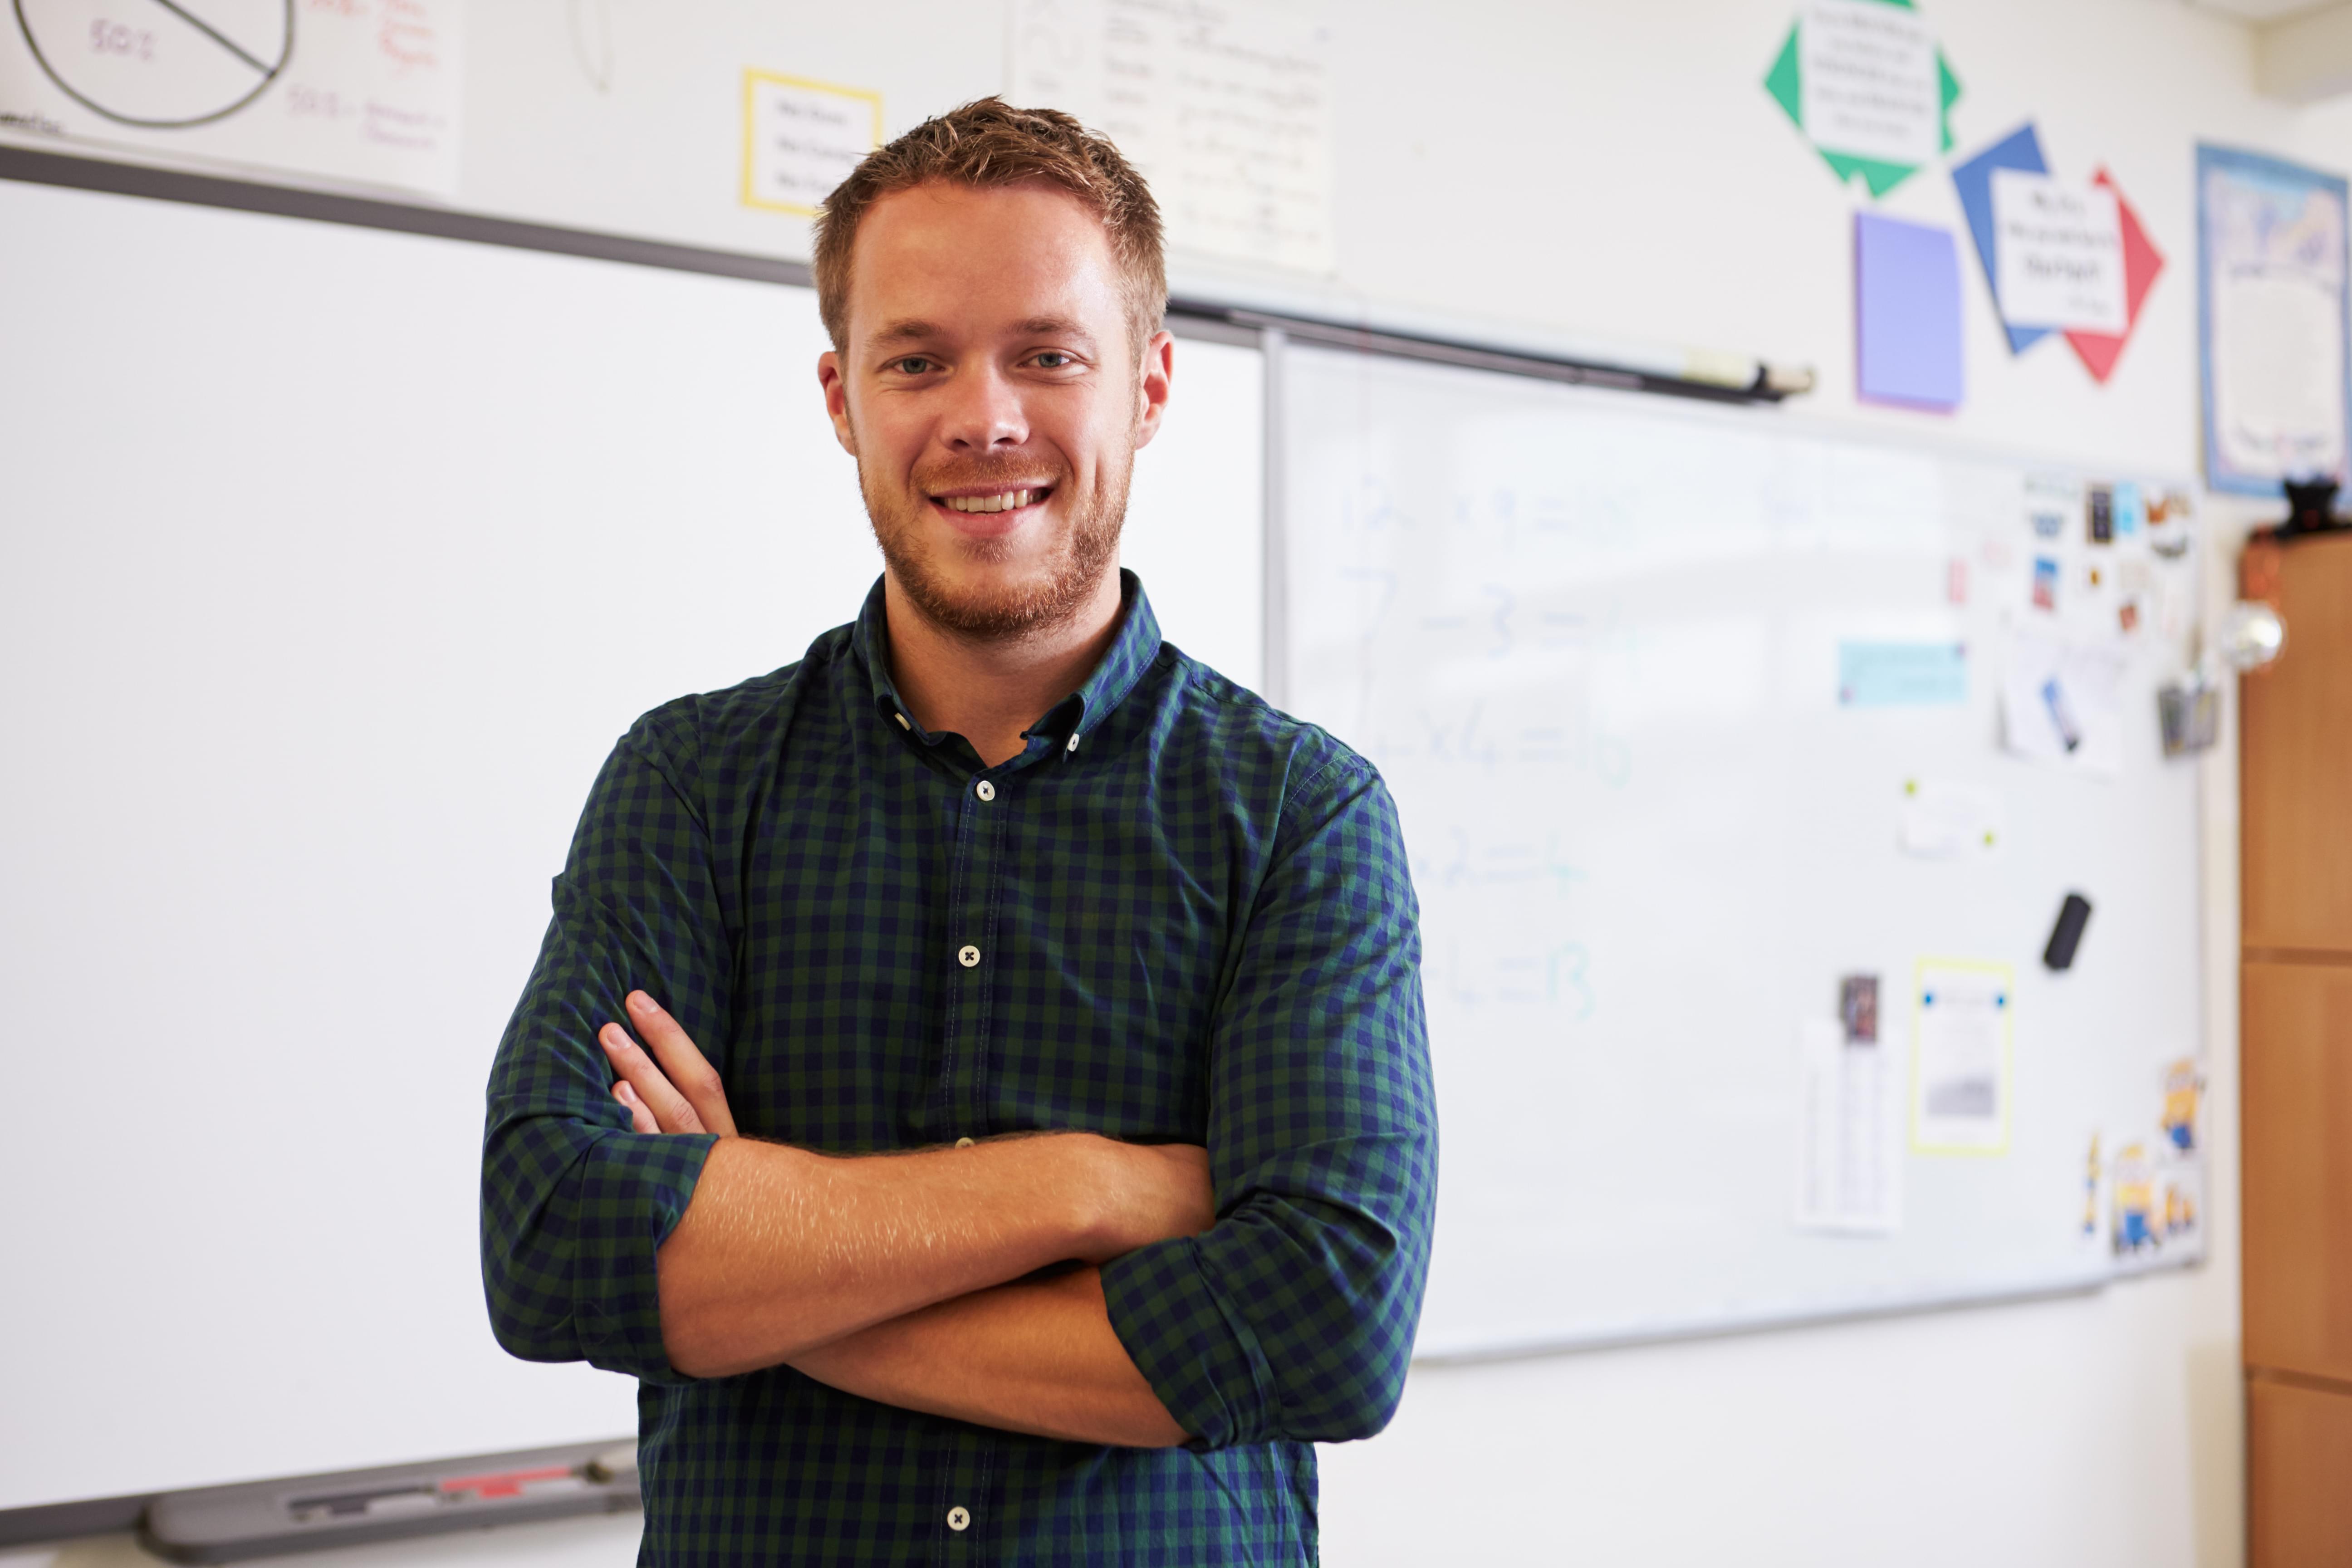 Calm, relaxed teacher in front of whiteboard